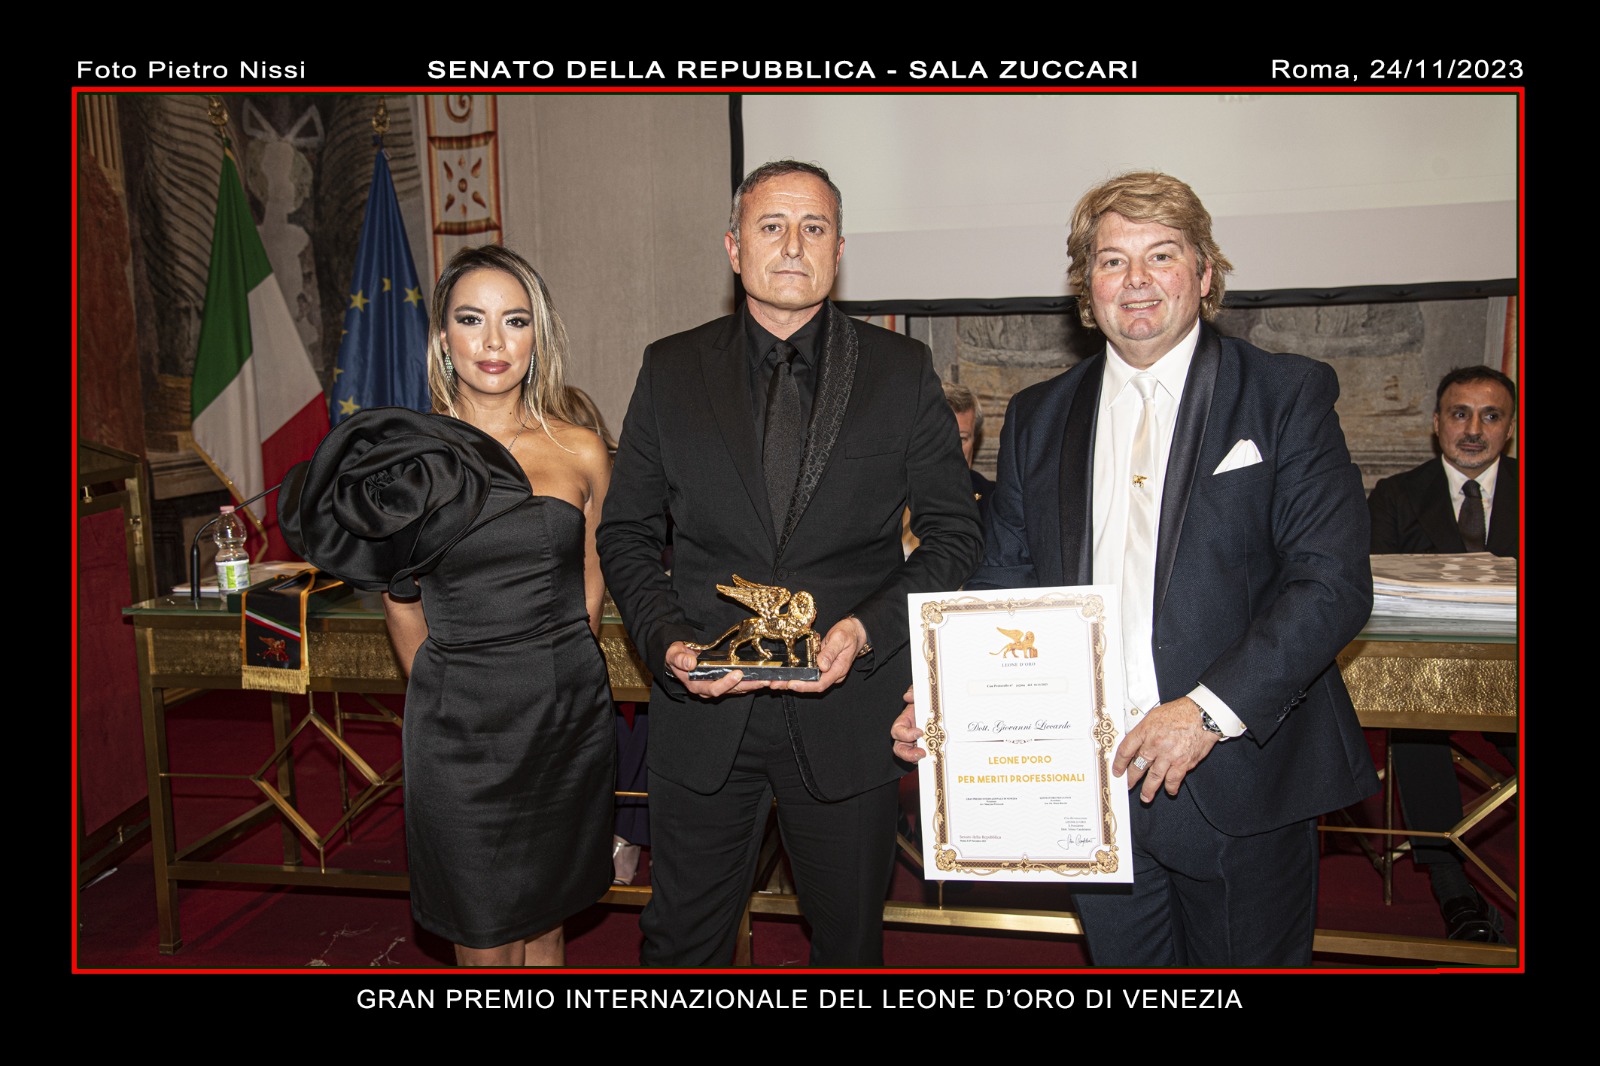 Giovanni Liccardo, founder and CEO of Lever Touch, awarded the Leone d'Oro in Venice for his professional achievements